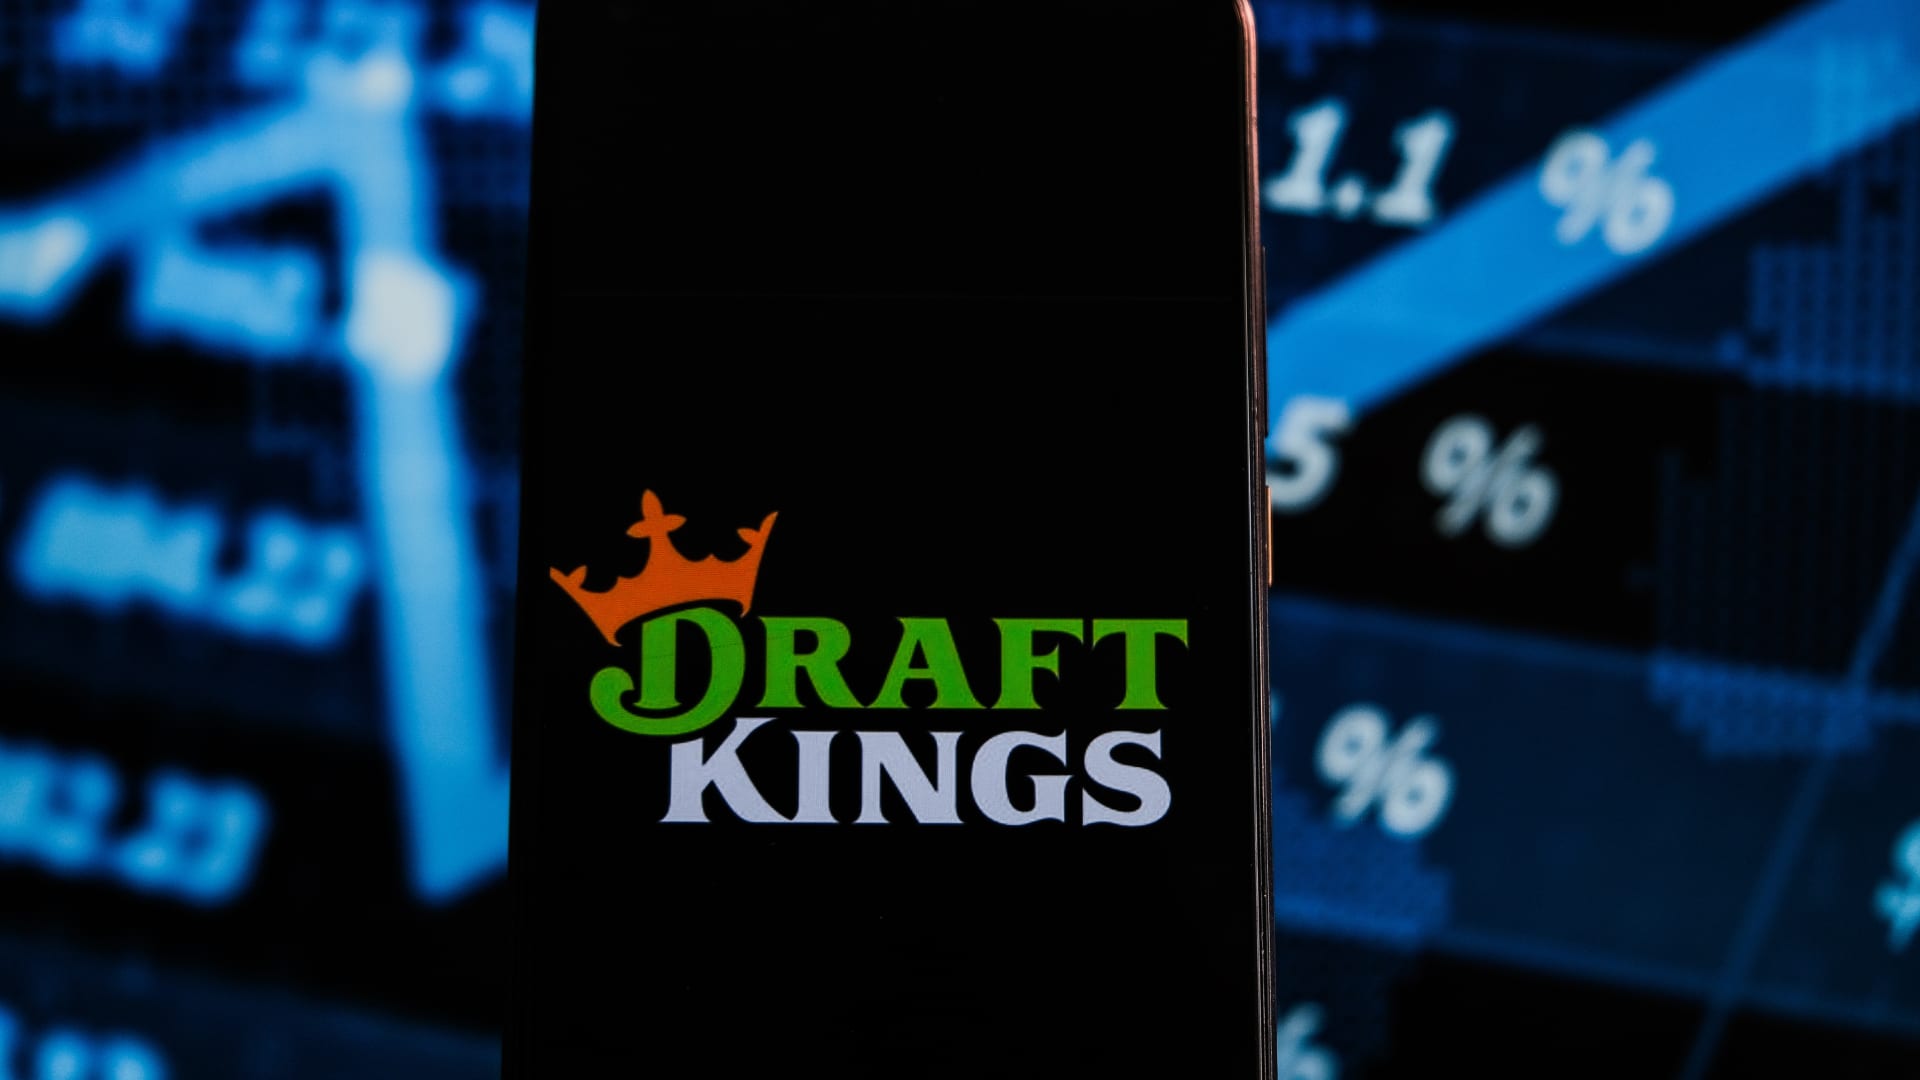 DraftKings shares tumble after monthly users fall short of estimates